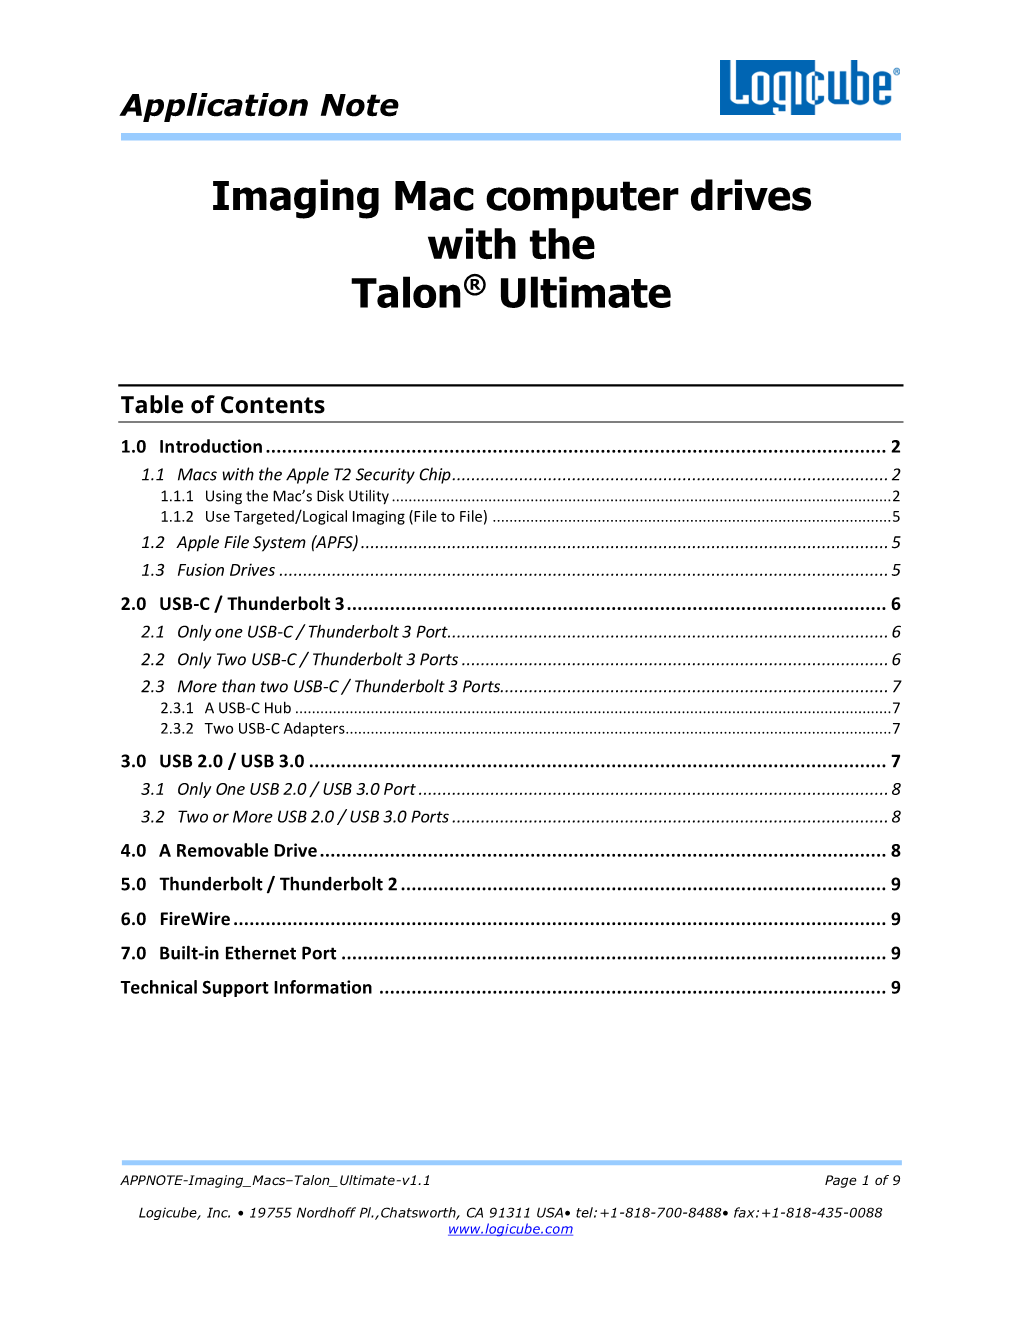 Mac Drives with the Talon Ultimate